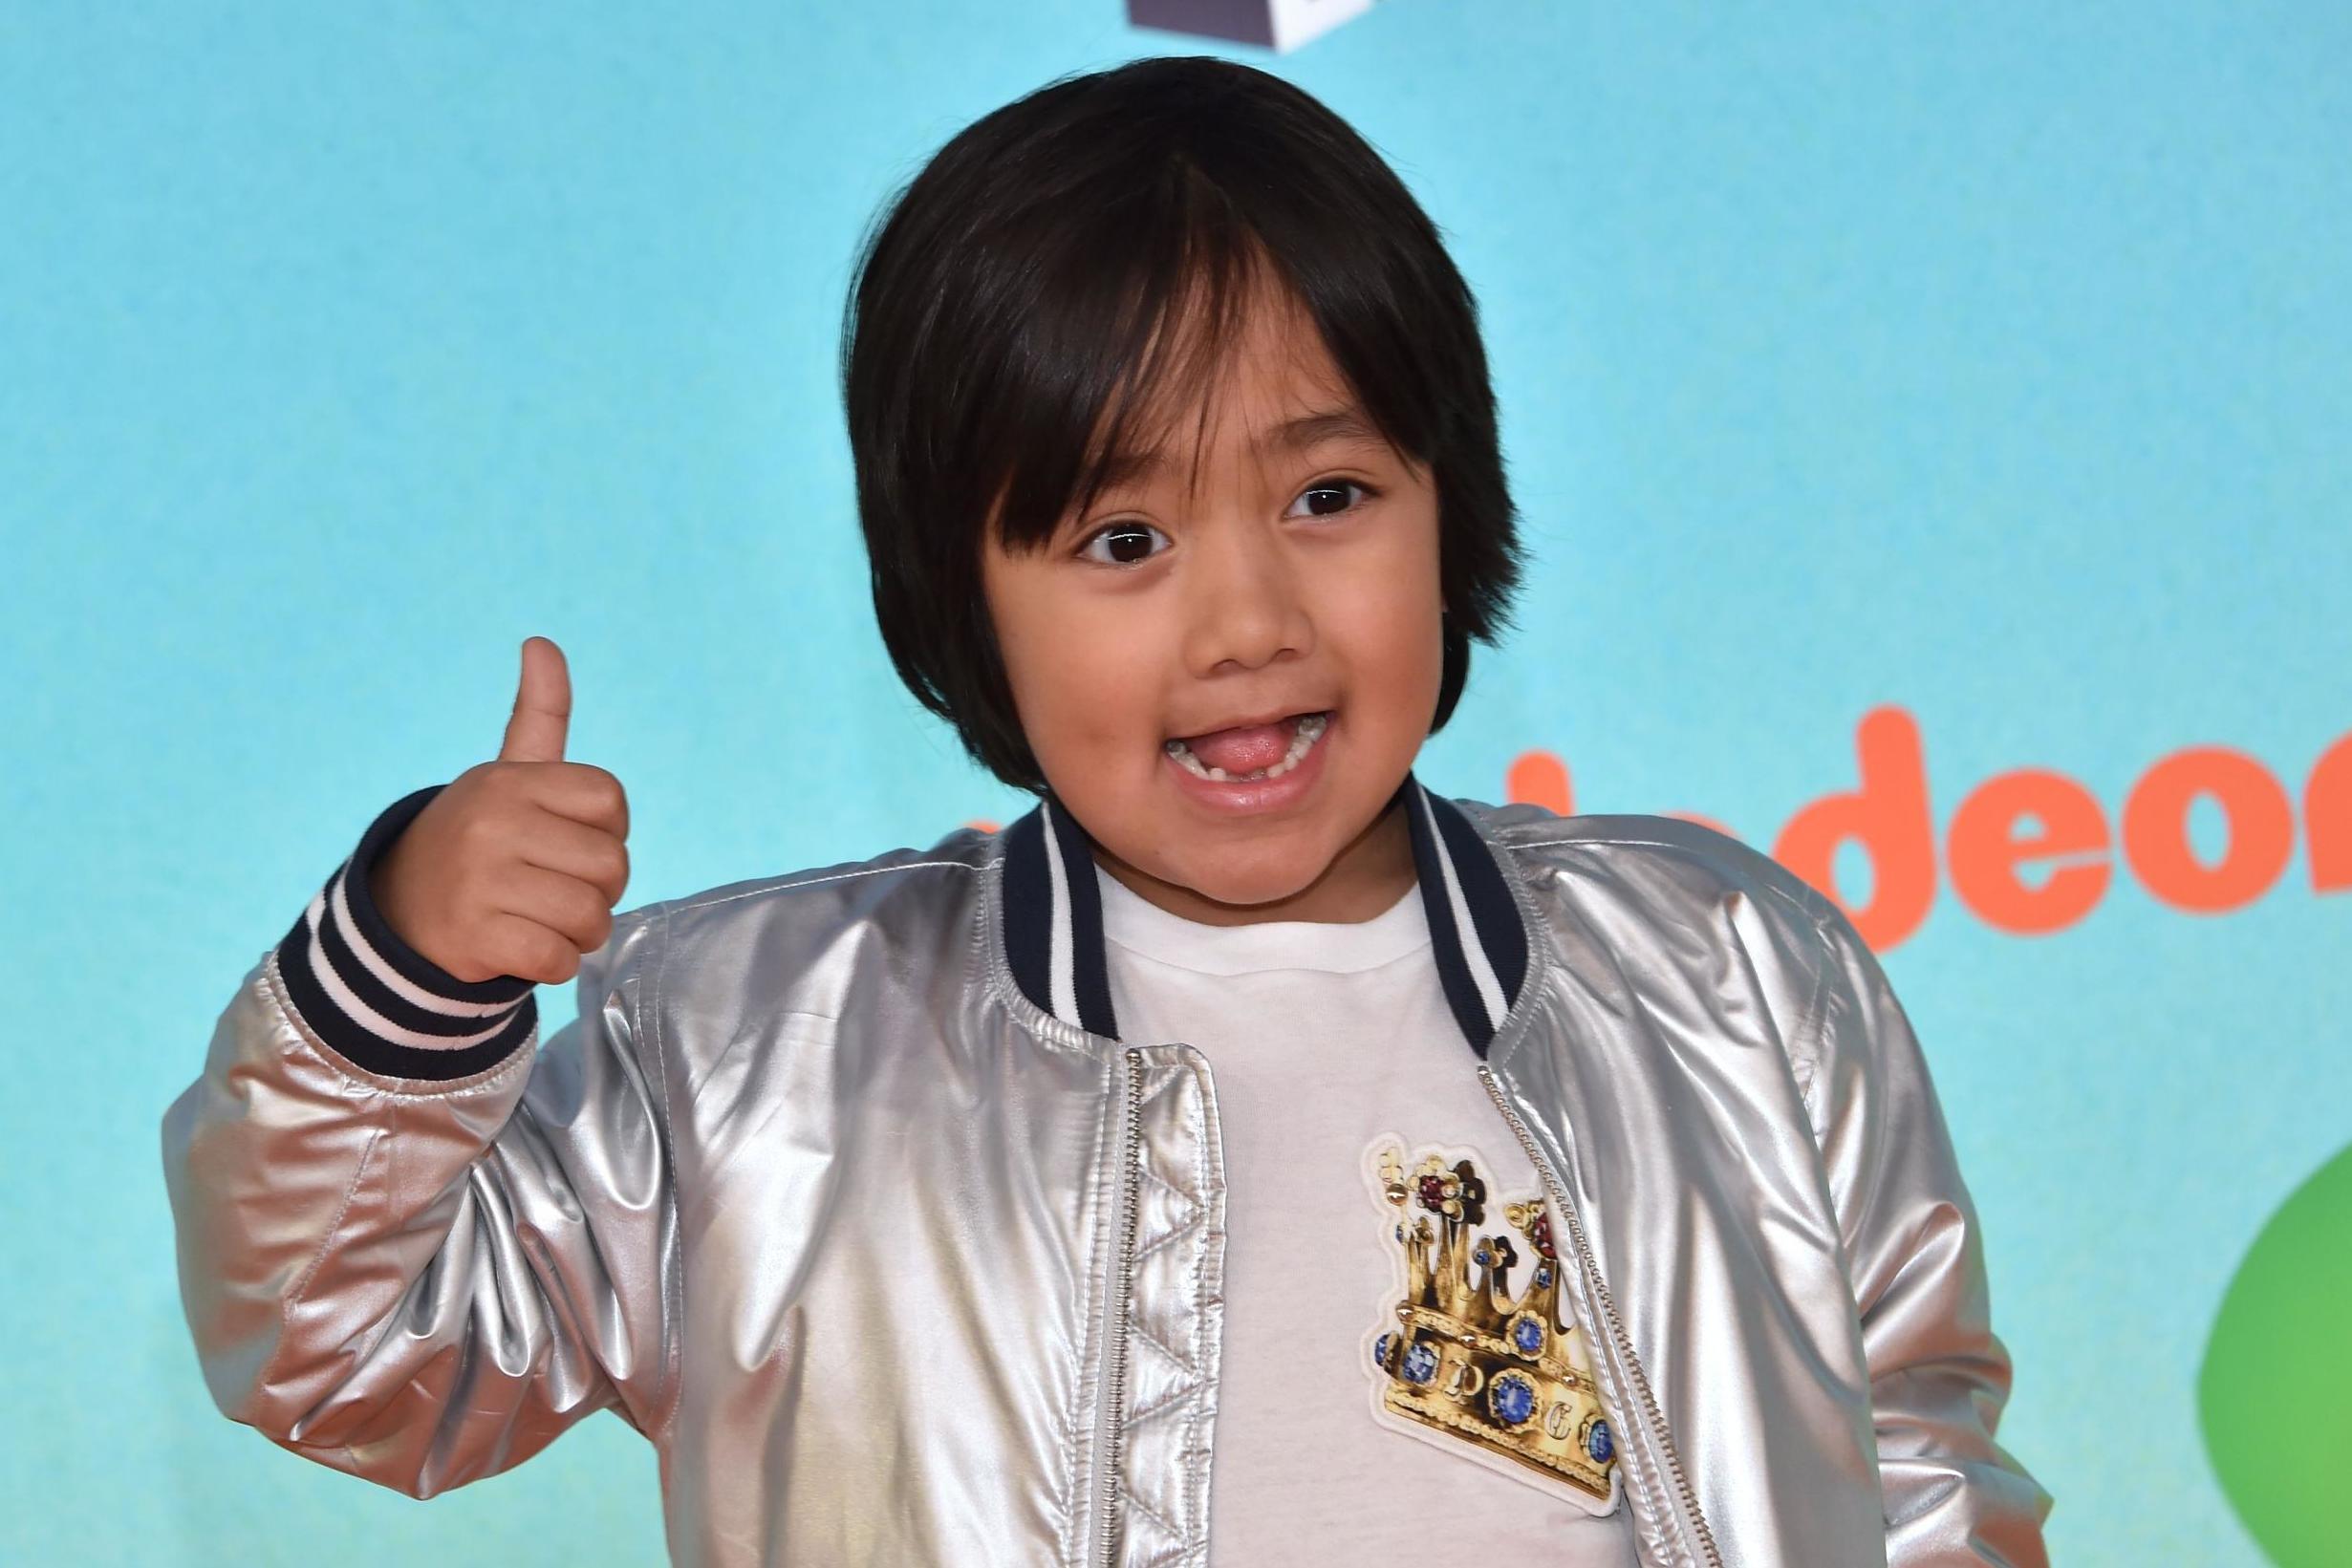 ryan of toysreview